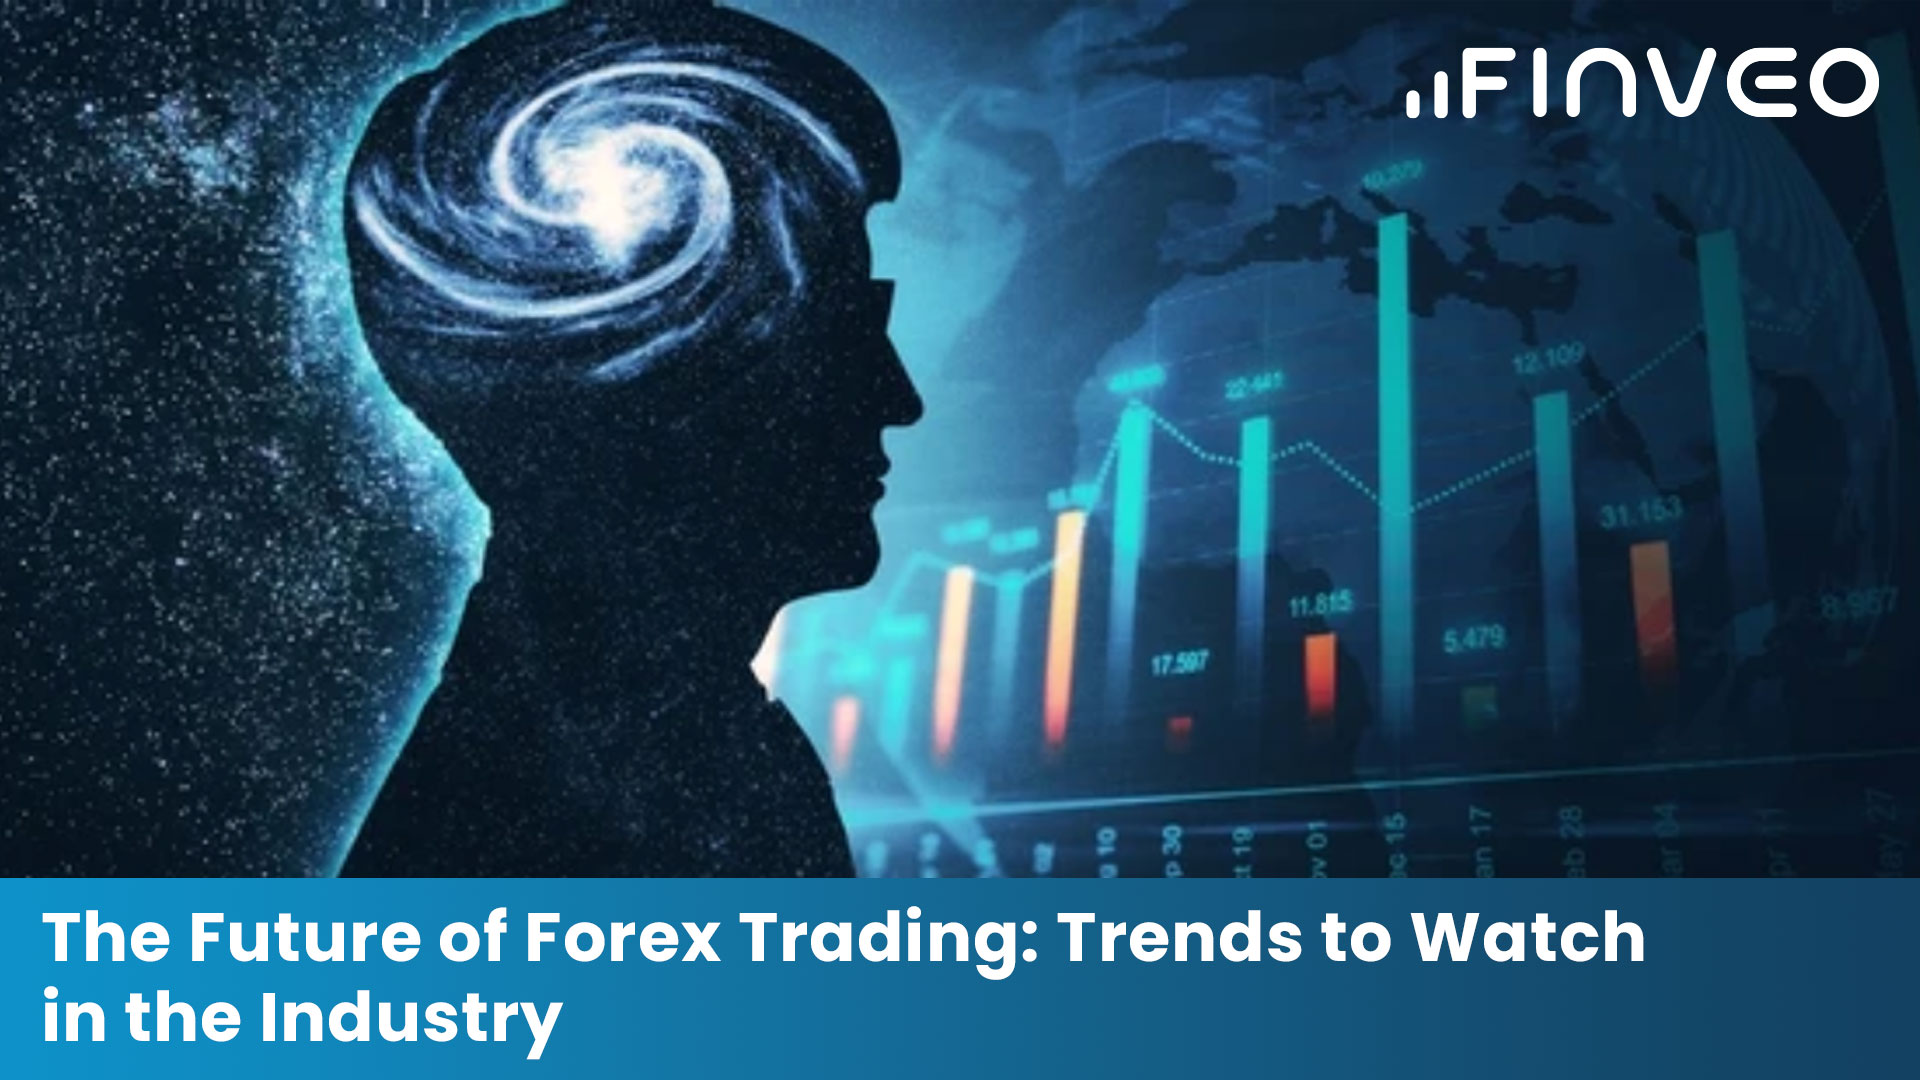 The Future of Forex Trading: Trends to Watch in the Industry